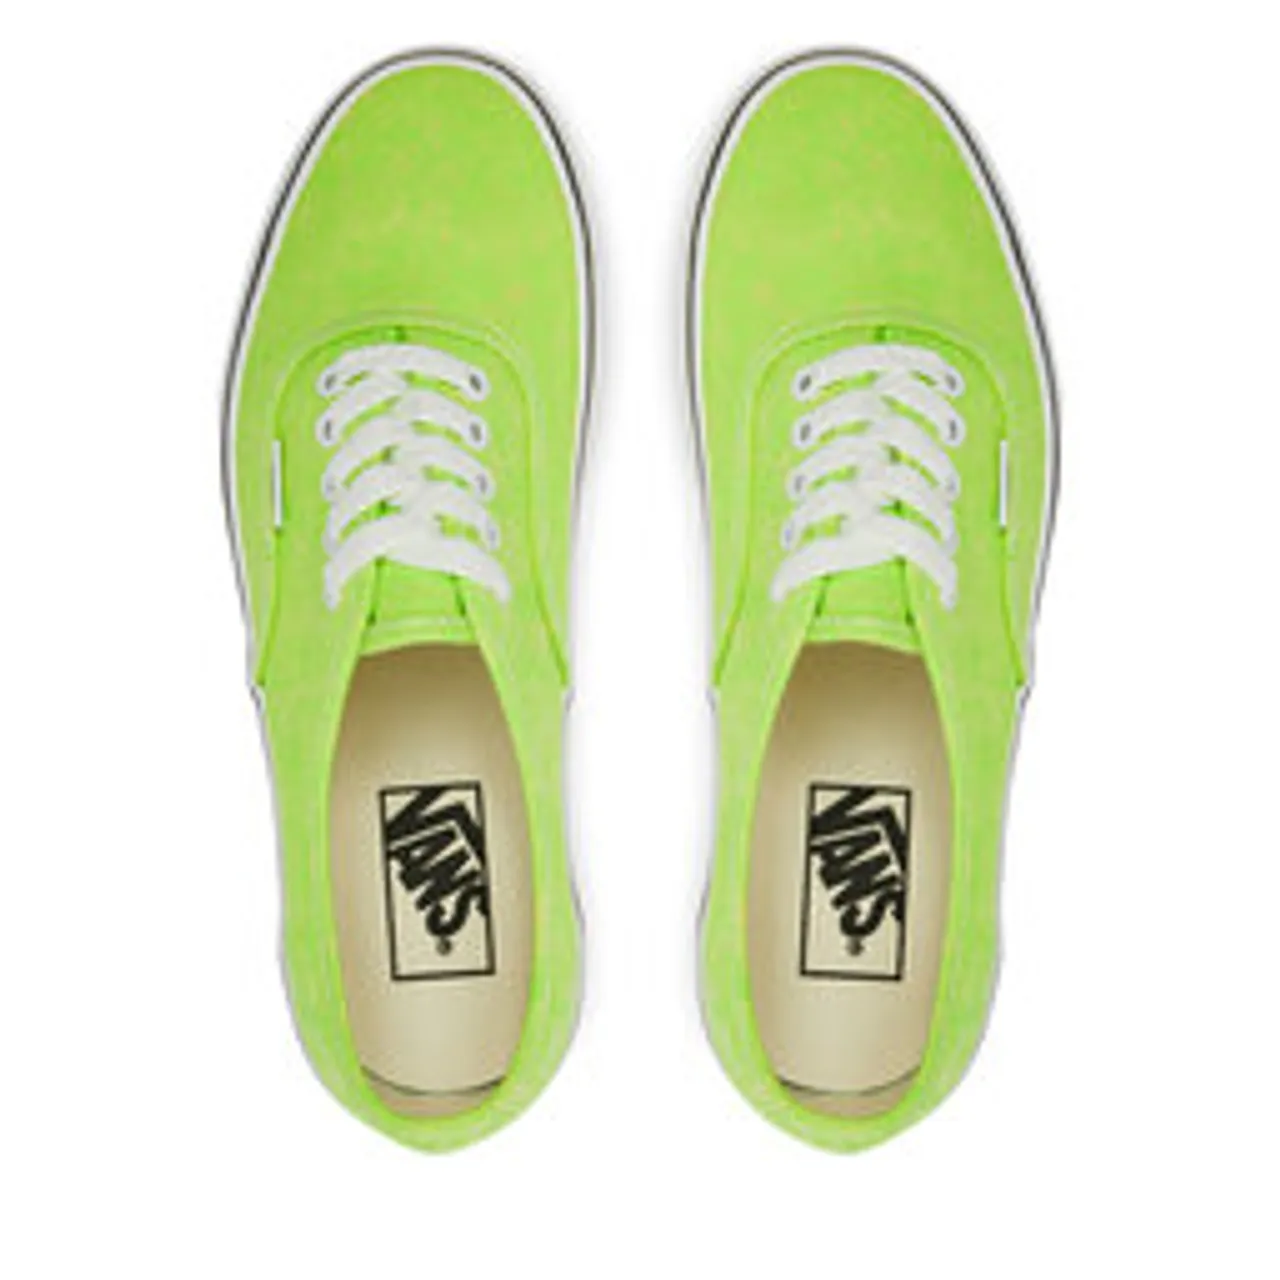 Sneakers aus Stoff Vans Authentic VN000BW5CX21 Green